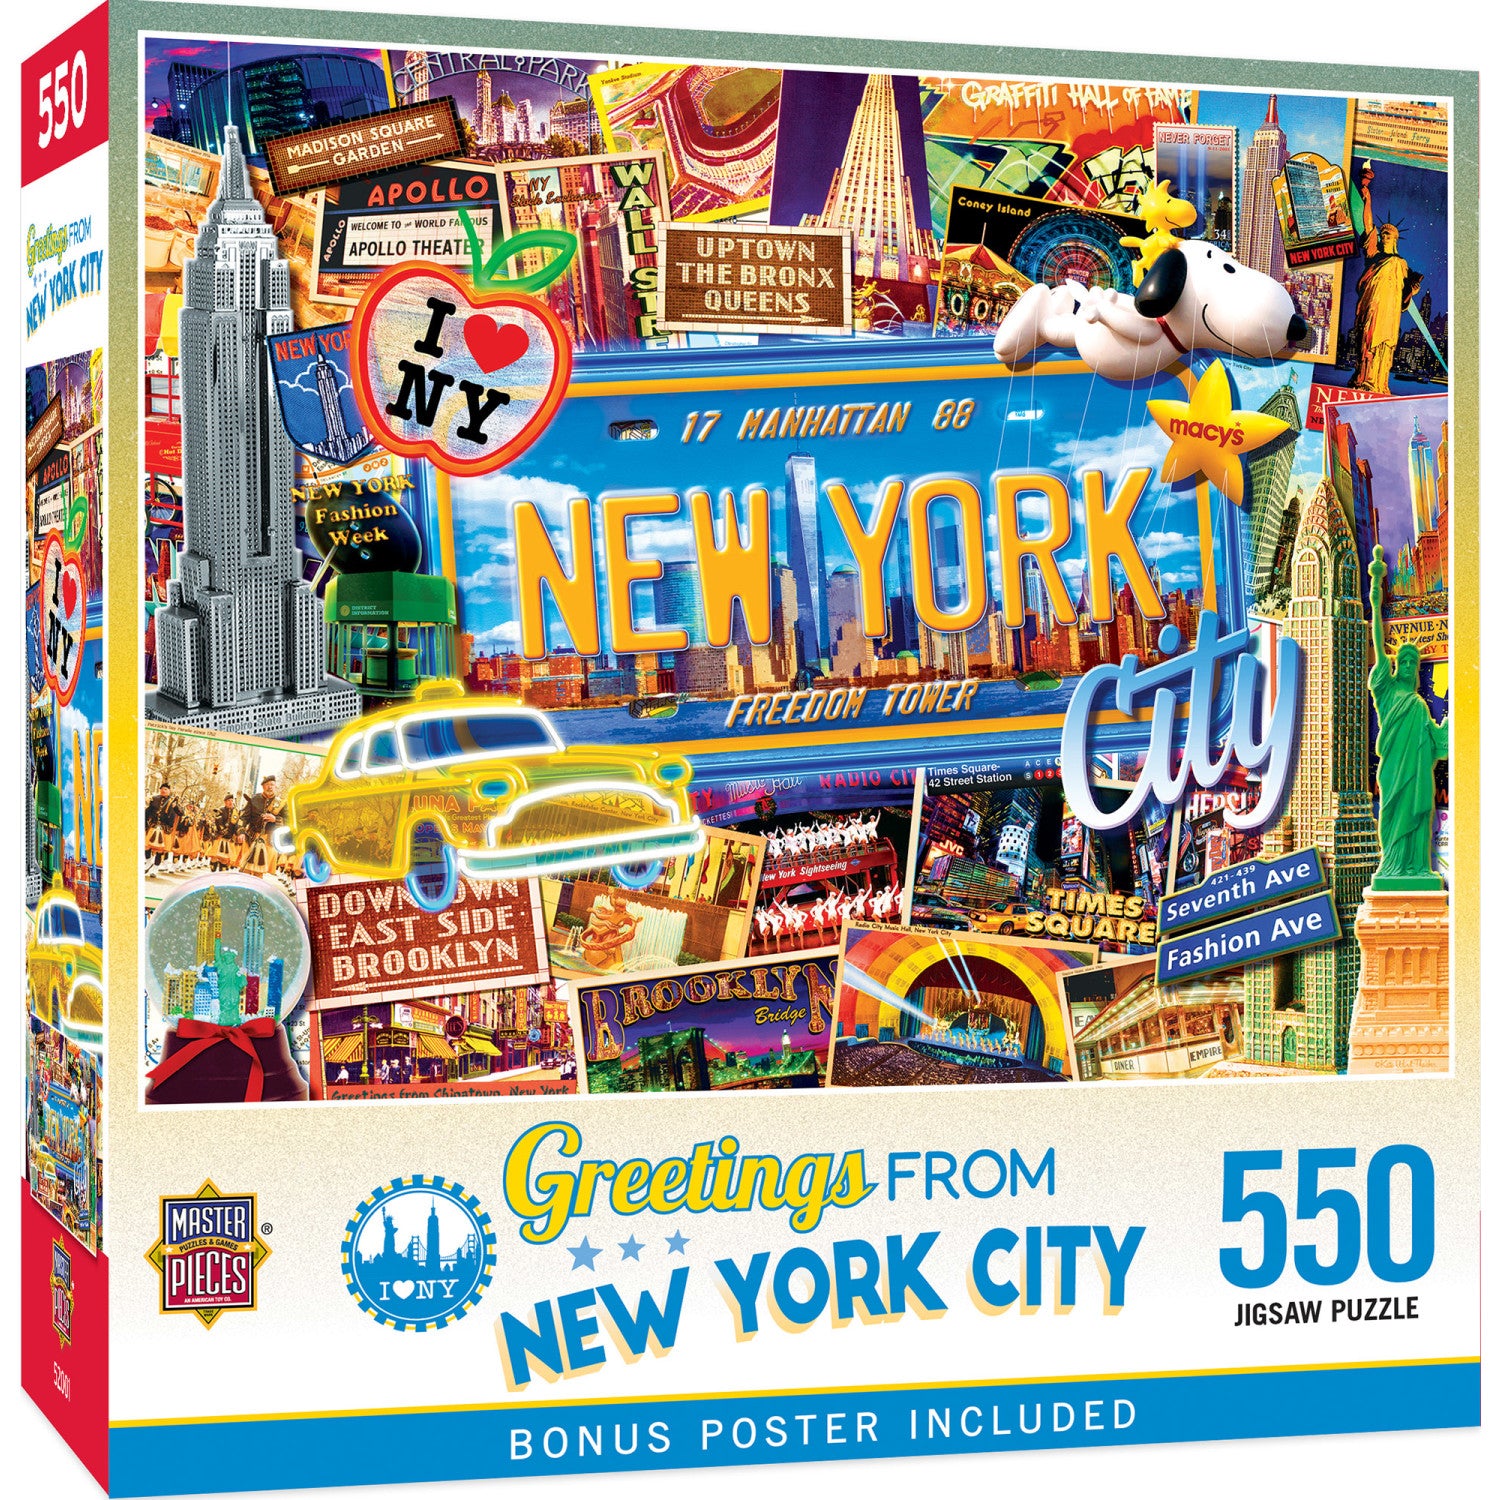 Greetings From New York - 550 Piece Puzzle